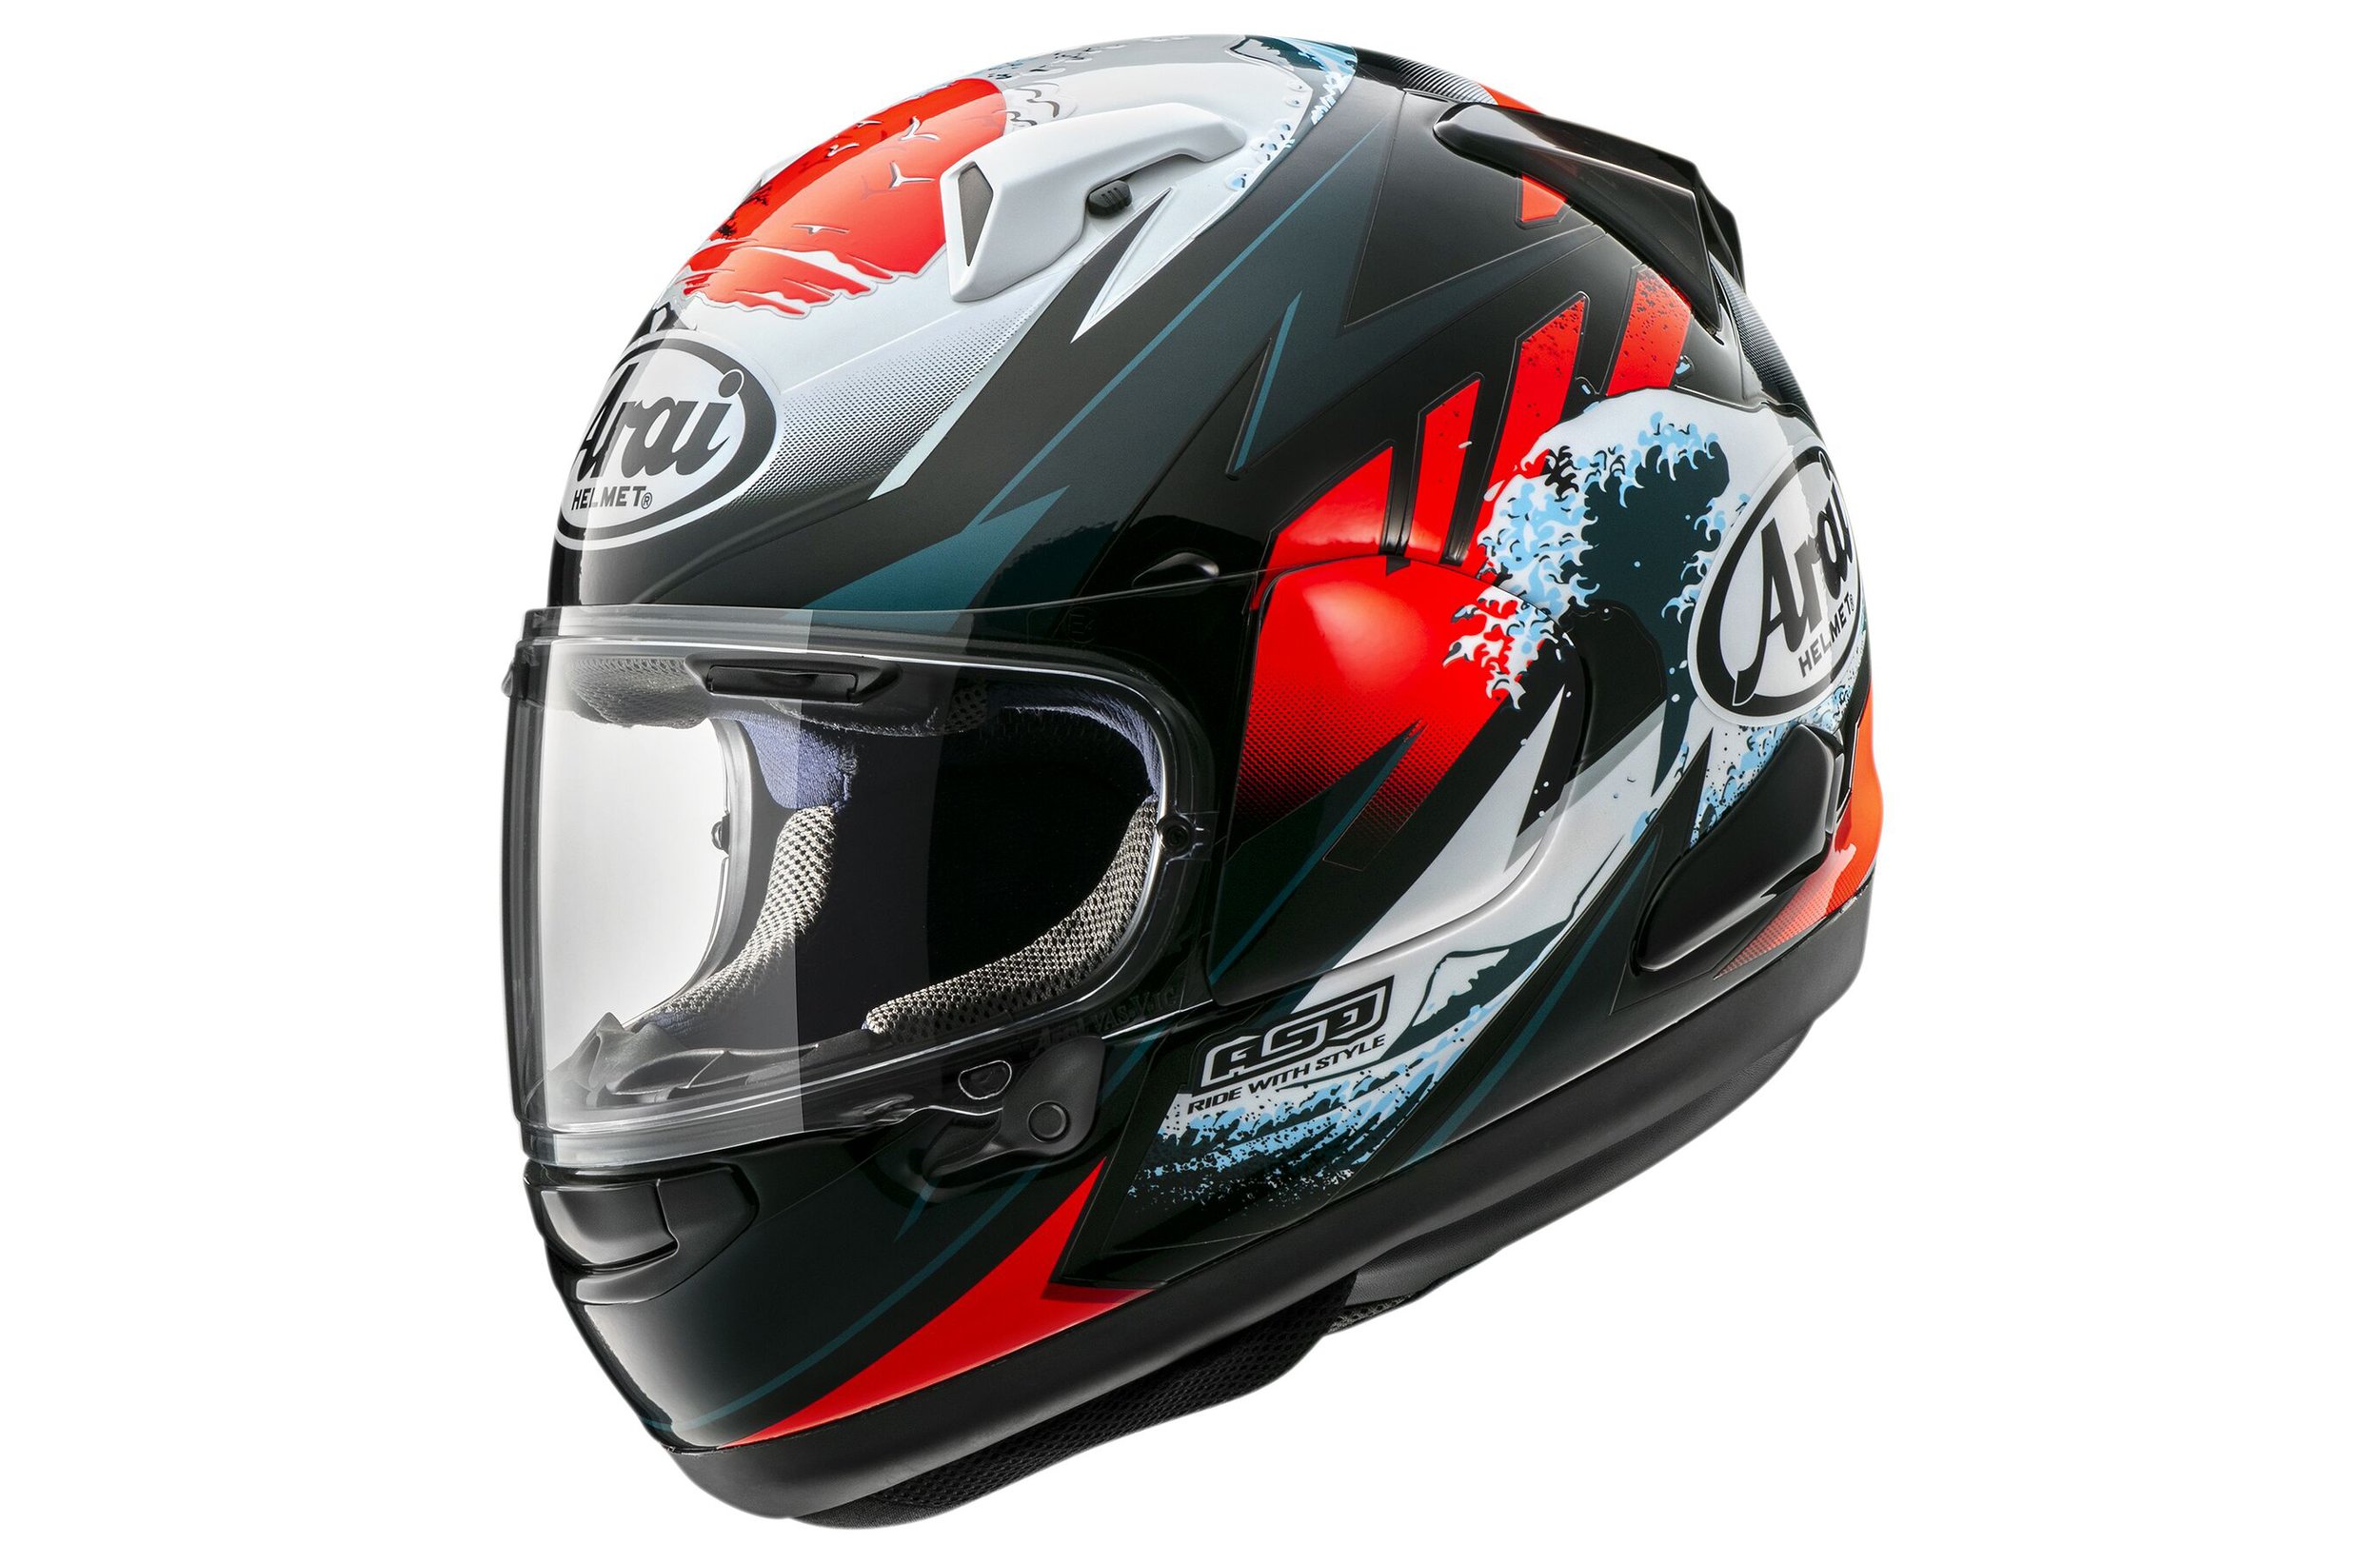 Motorcycle News, Reviews, and Lifestyle, Gear Up Knee Down, Arai Quantum-X  Wave